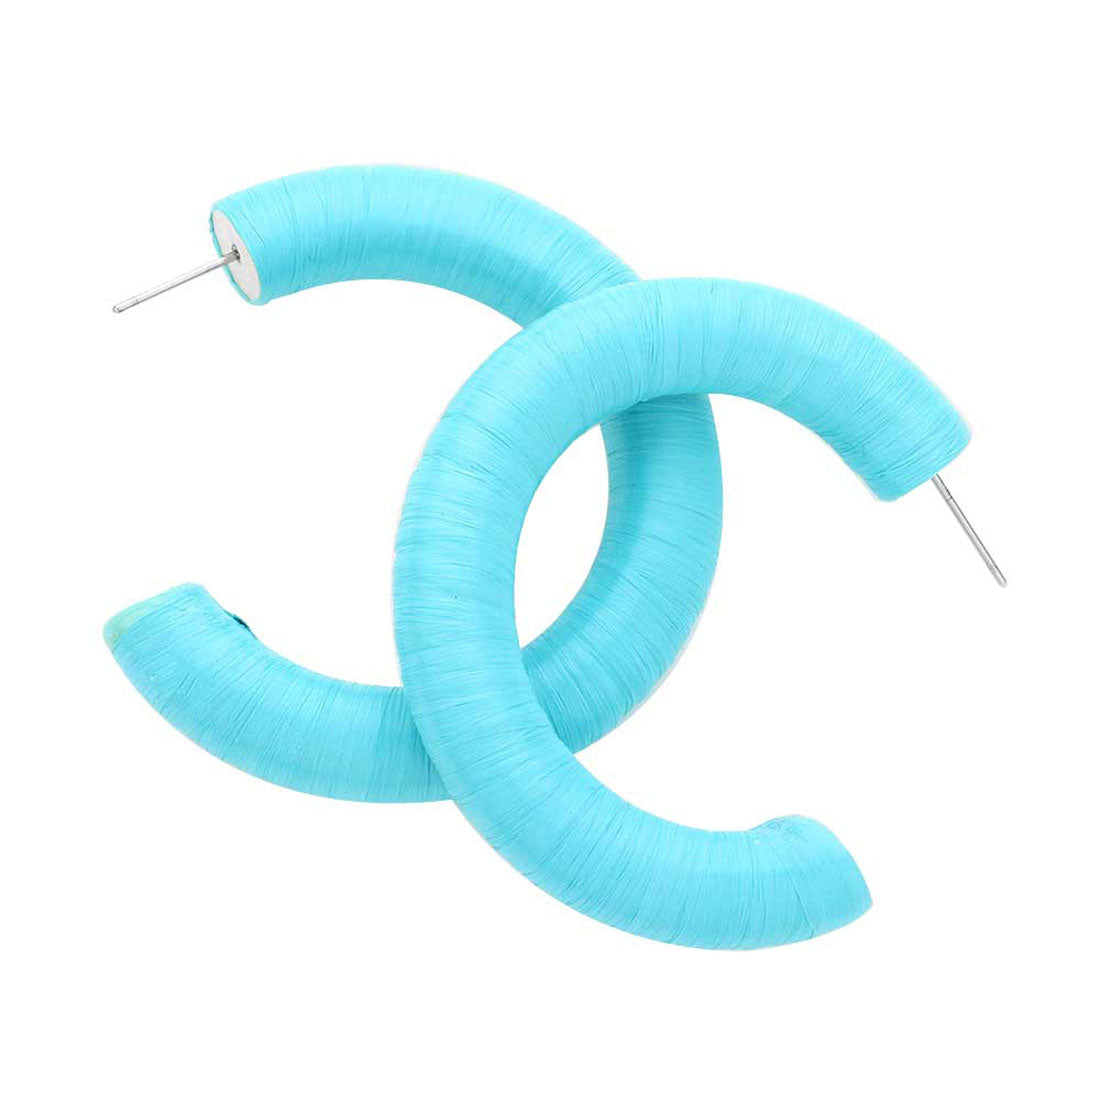 Turquoise Raffia Wrapped Hoop Earrings! These dangly accessories bring a touch of shimmer and shine to any look. Great for birthdays, anniversaries, or just because - these earrings are the perfect gift for your special someone (or yourself!). Get ready to make a sartorial statement! Awesome everyday day wear, pairs well with any outfit.